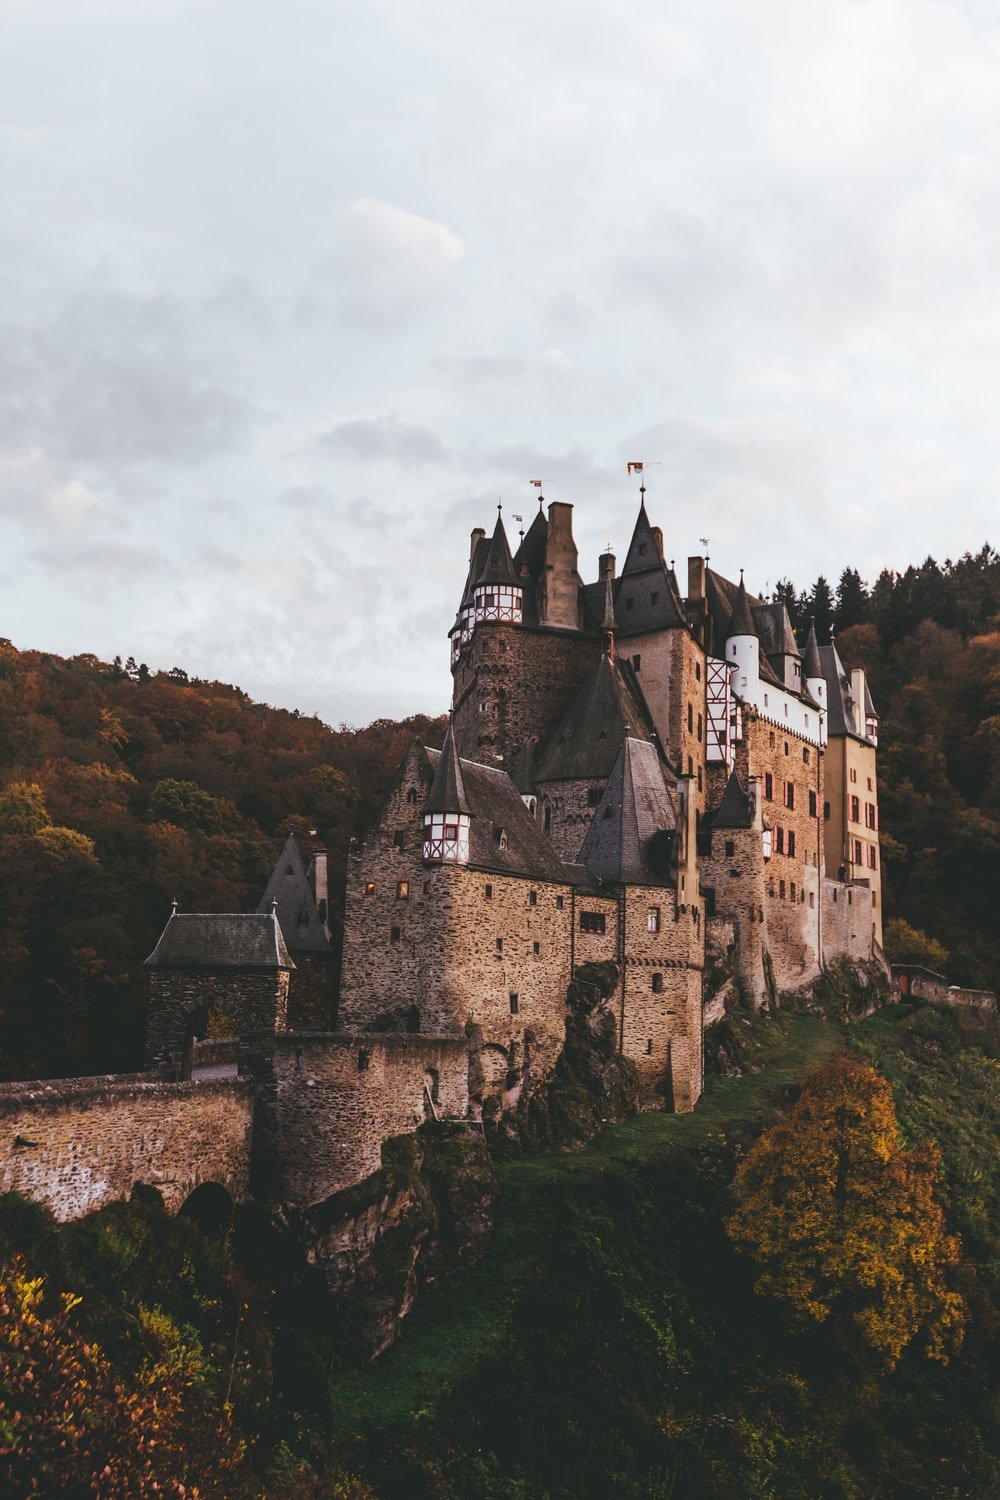 Medieval Castle Picture. Download Free Image